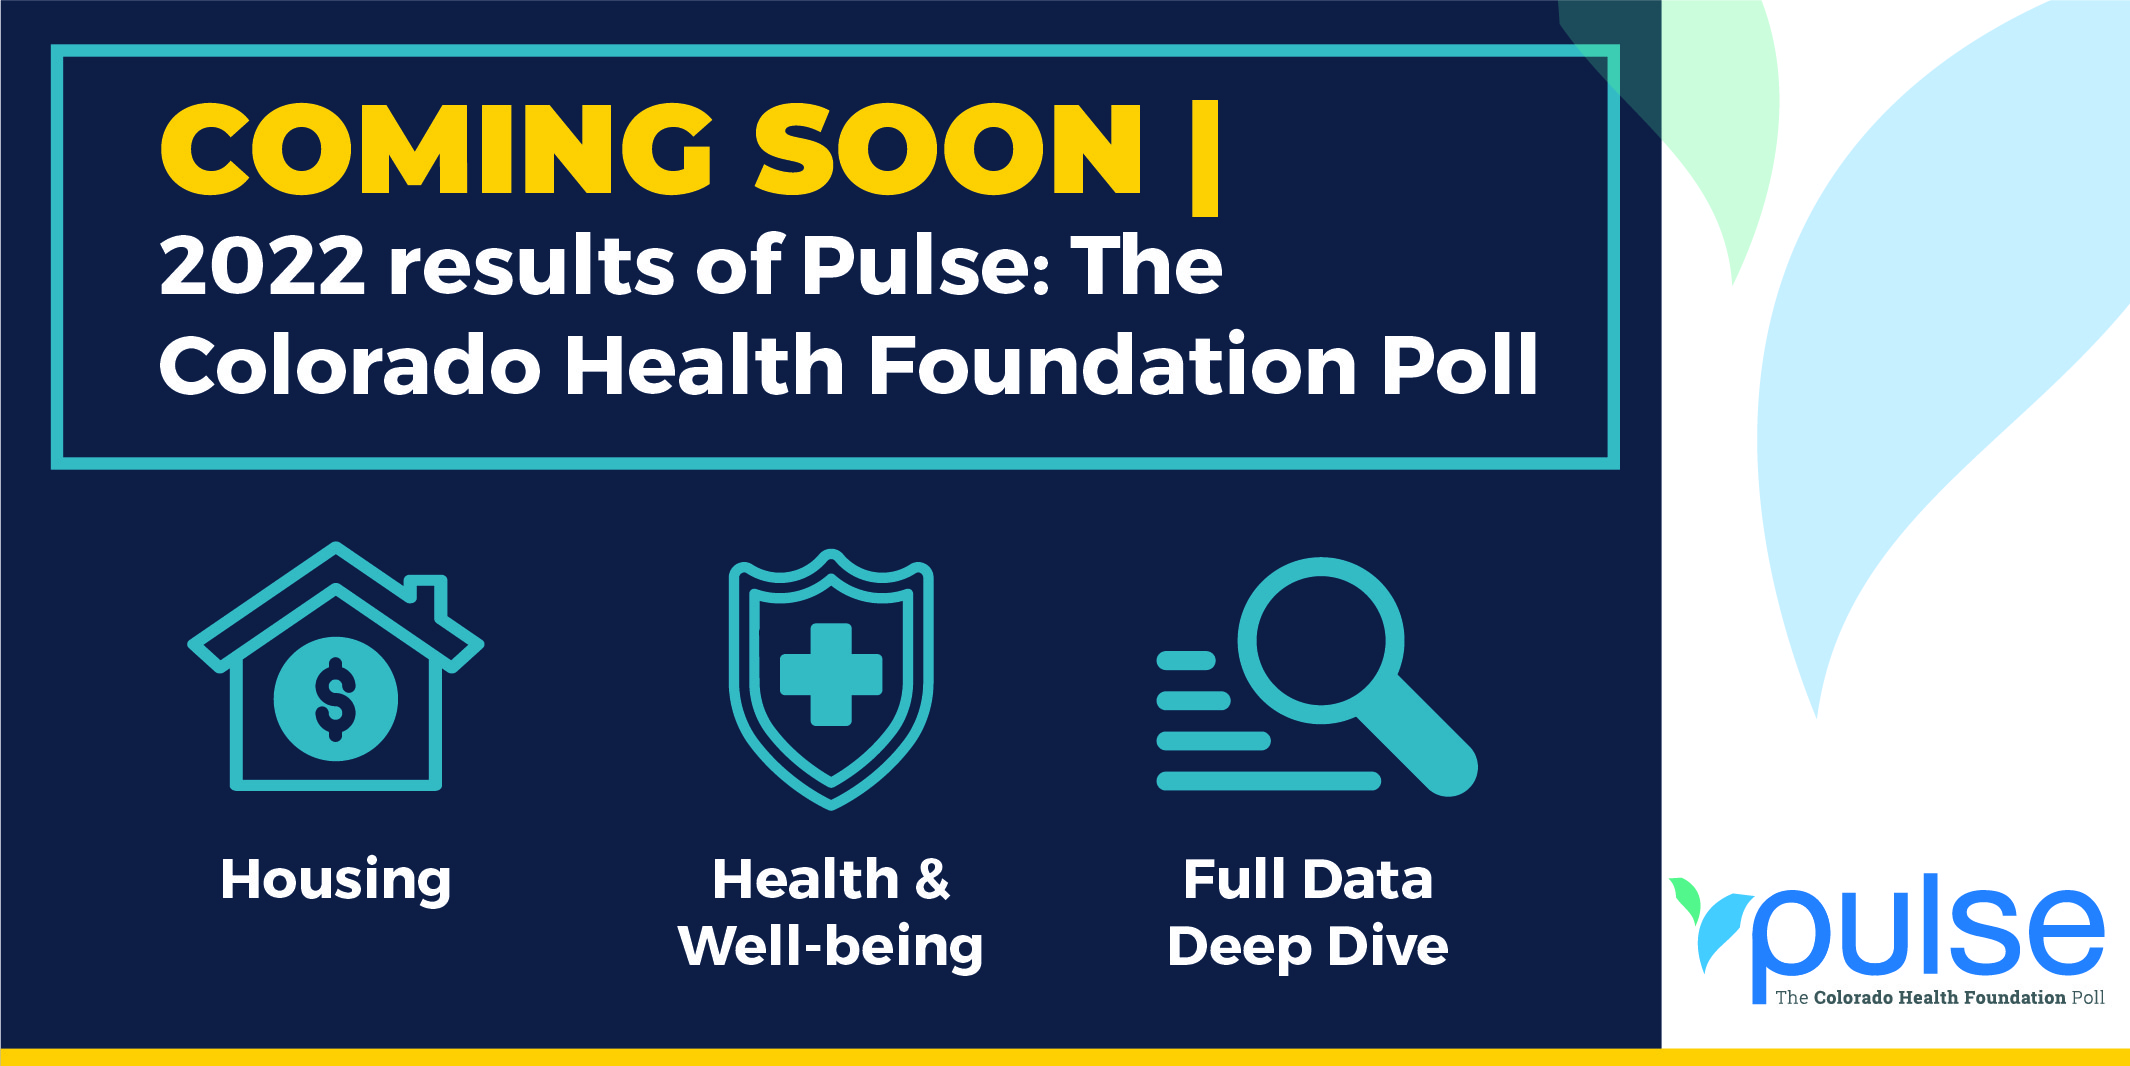 Coming Soon | 2022 results of Pulse: The Colorado Health Foundation Poll